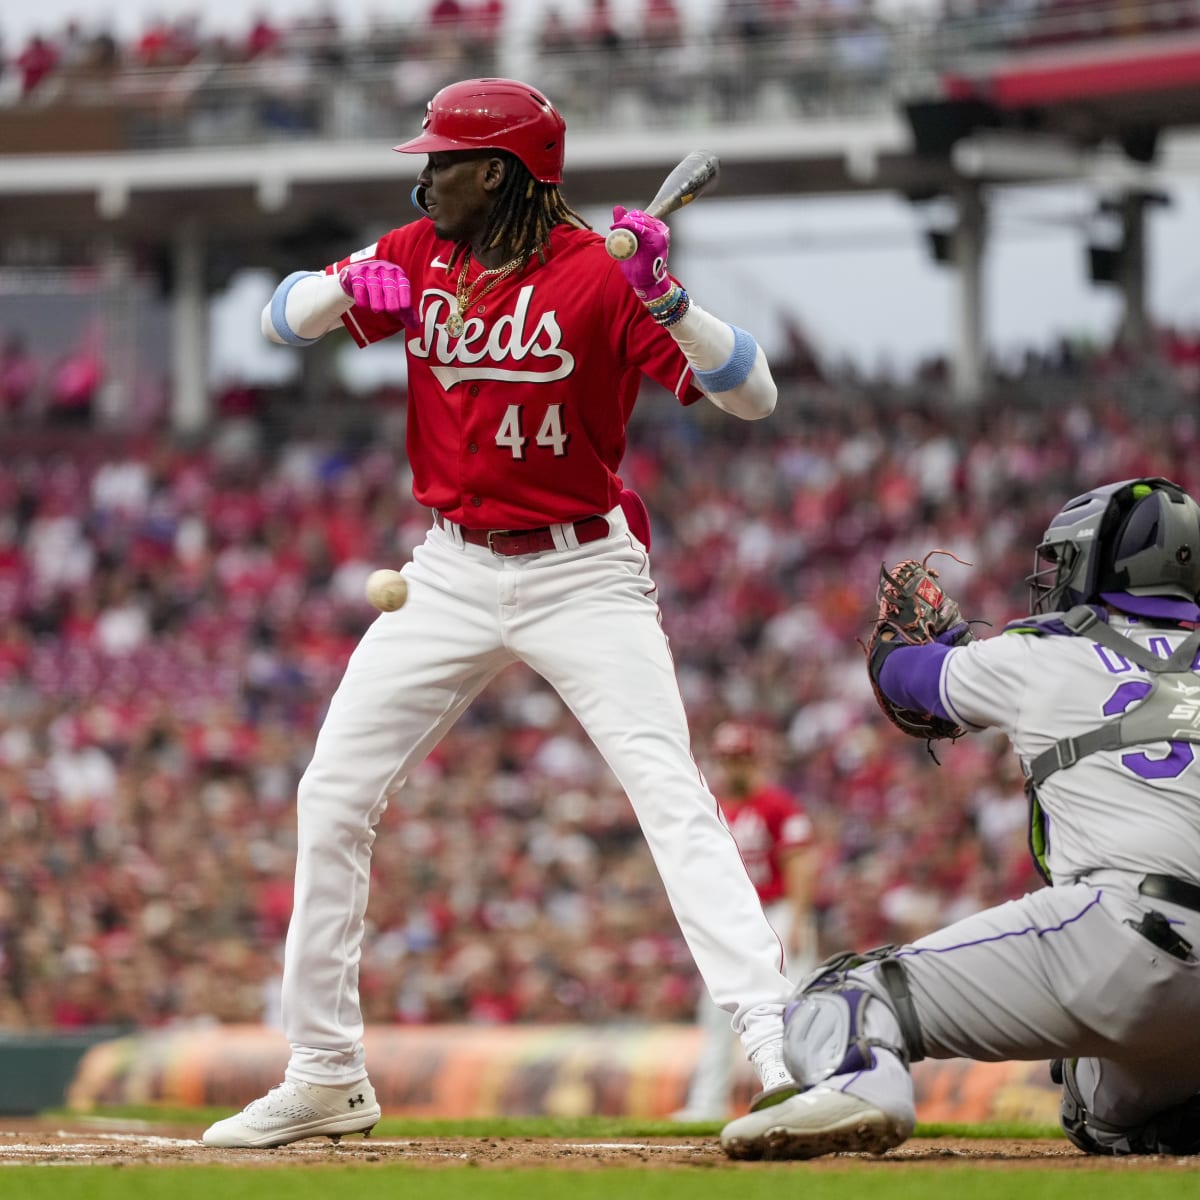 Cincinnati Reds Tie Franchise History with Another Win on Tuesday